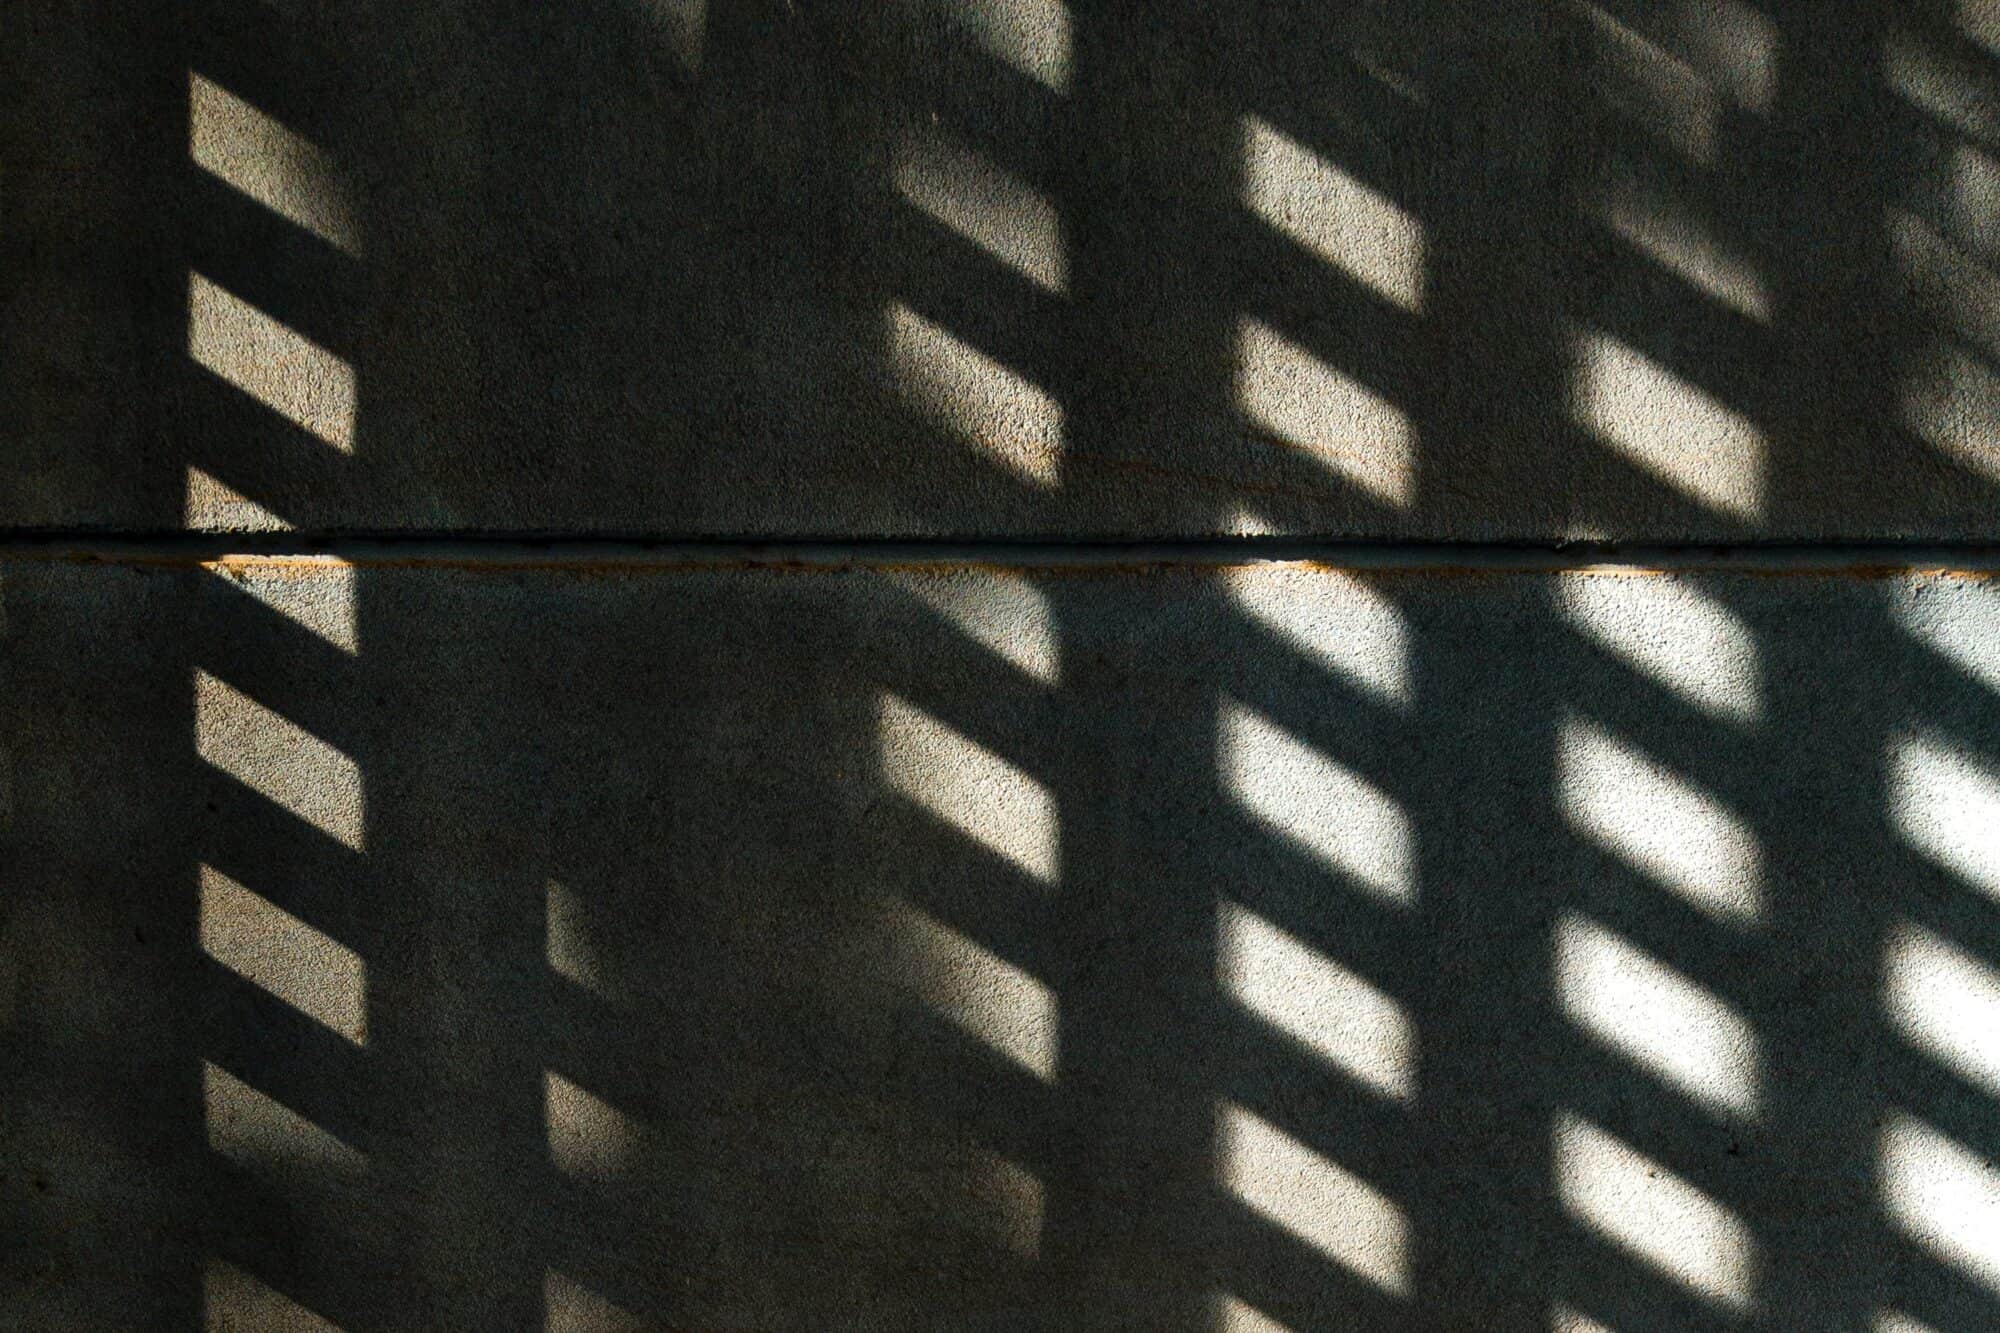 The shadows of bars over sunlight across a concrete wall.